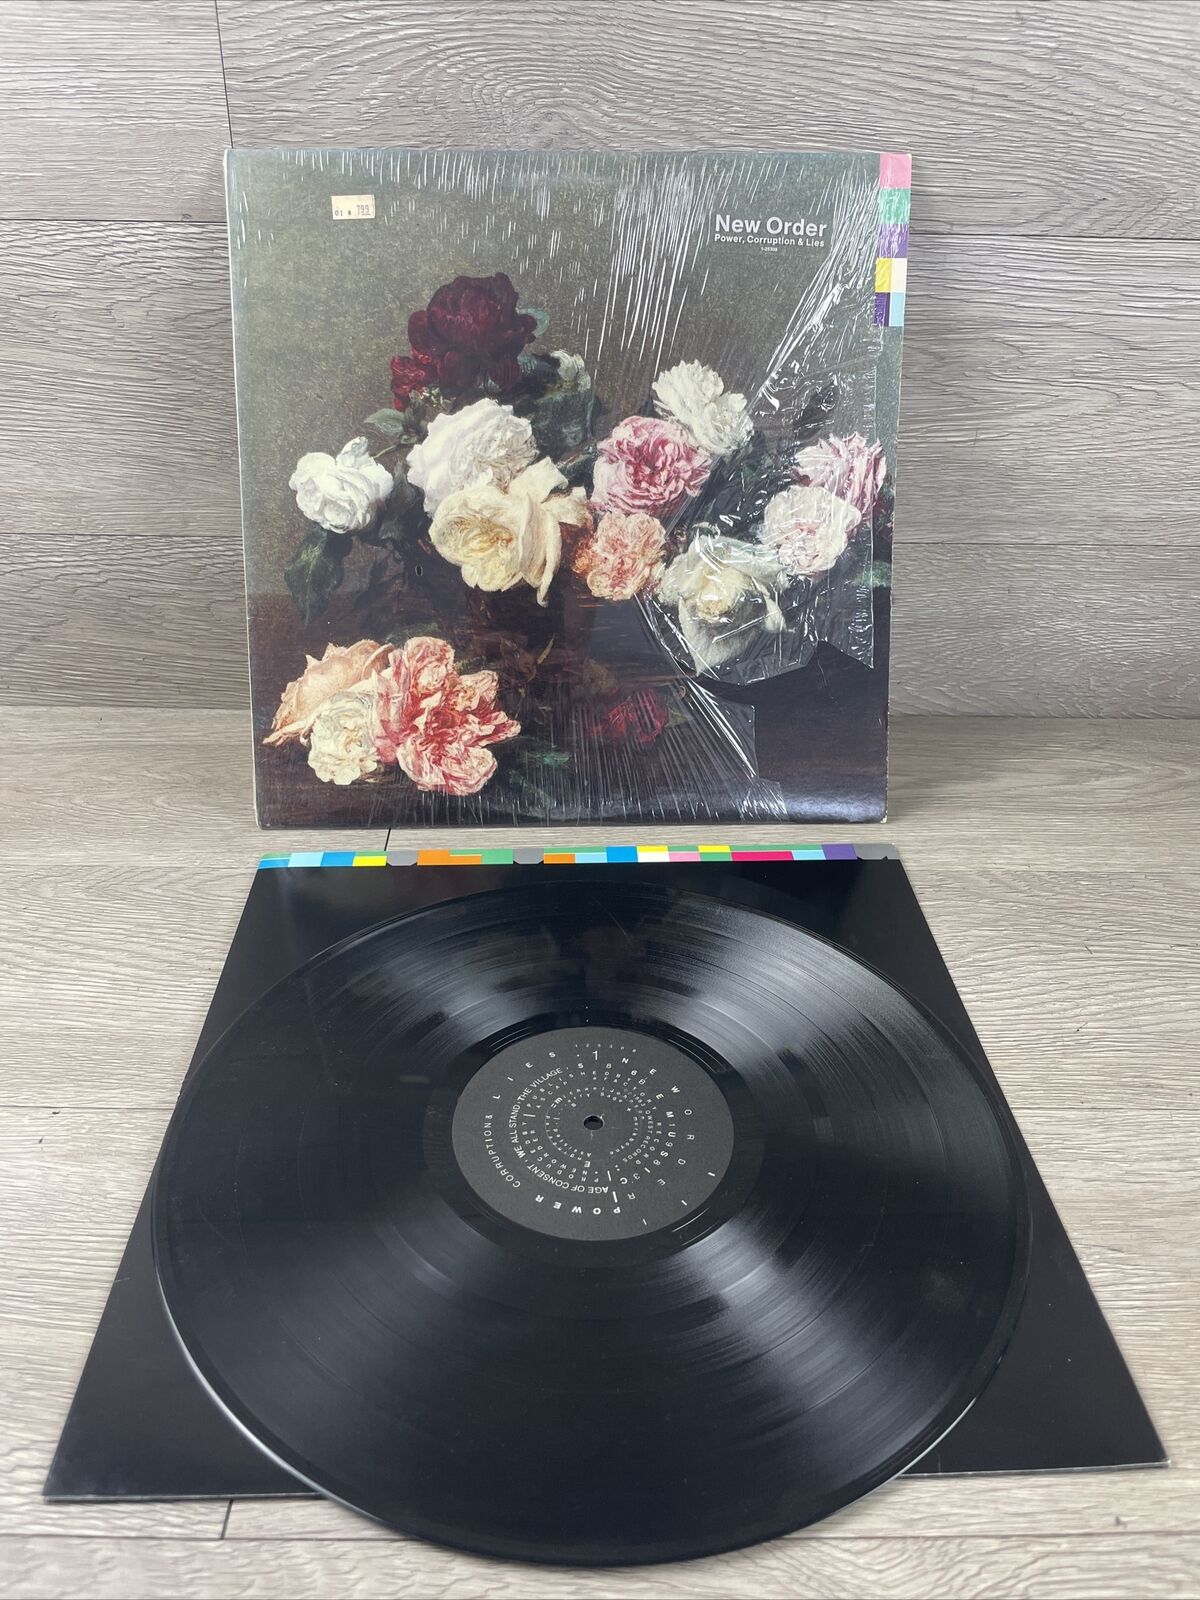 New Order: Power Corruption And Lies (Vinyl LP, 1983 Factory US) New Wave